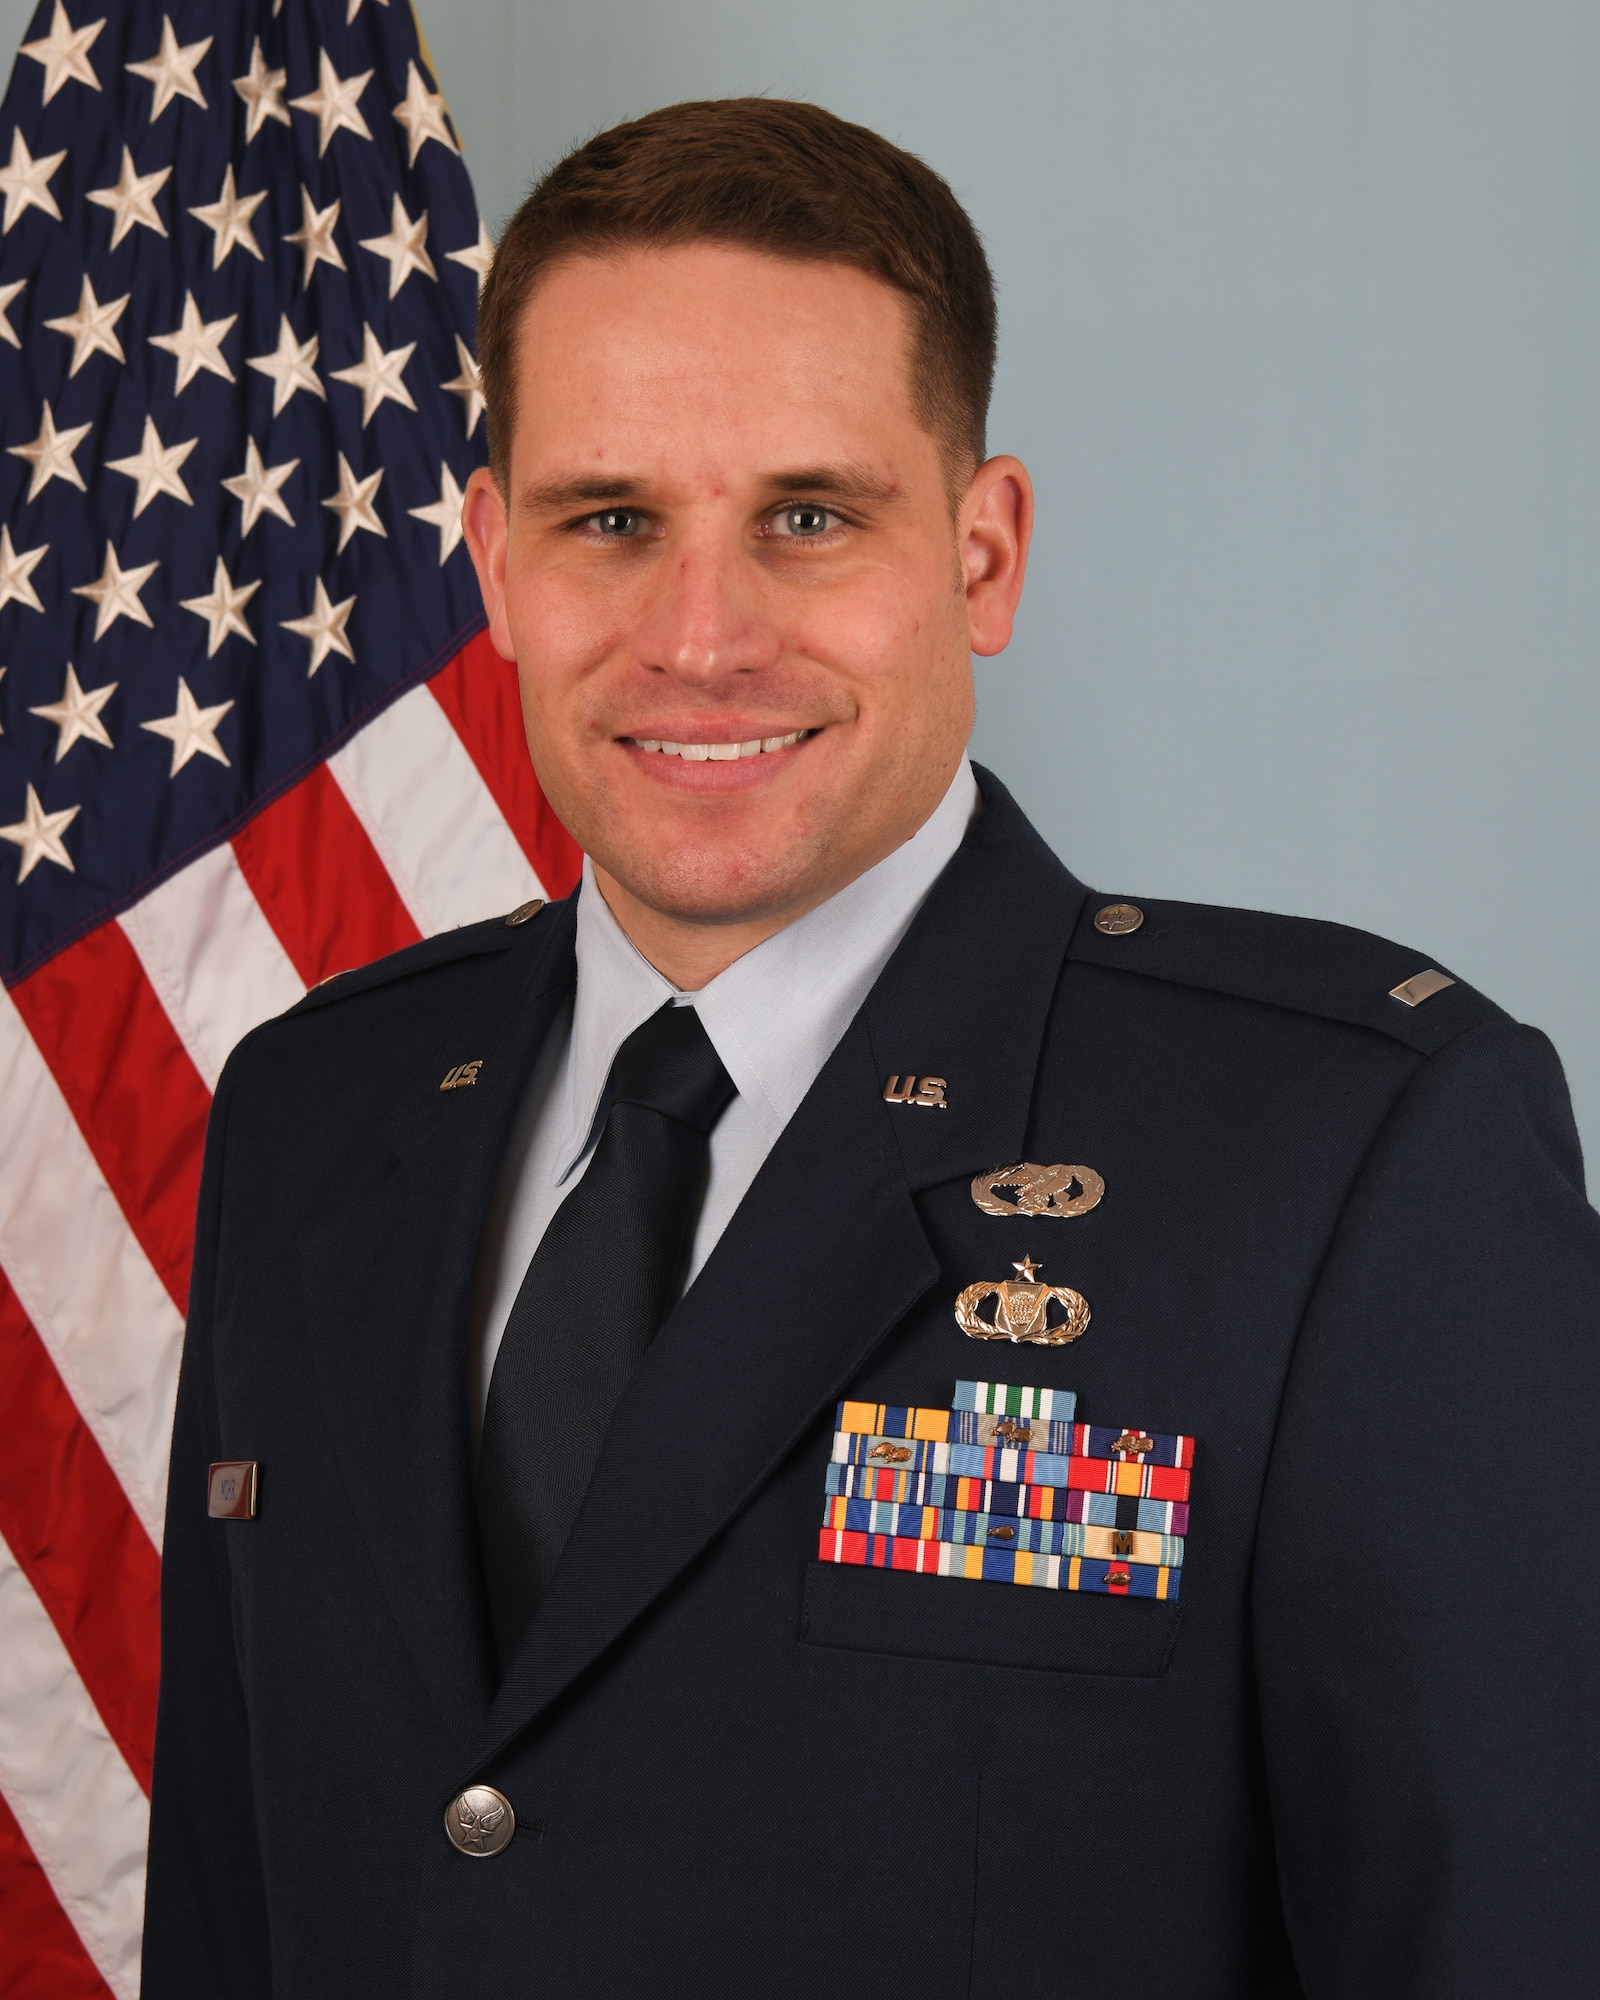 Capt. Tyler Mohr, 445th Logistics Readiness Squadron fuels management flight commander (formerly assigned to the 87th Aerial Port Squadron), won the 2020 Outstanding Air Force Reserve Command Logistics Readiness award, Company Grade Officer of the Year category. The announcement was made March 29, 2021.